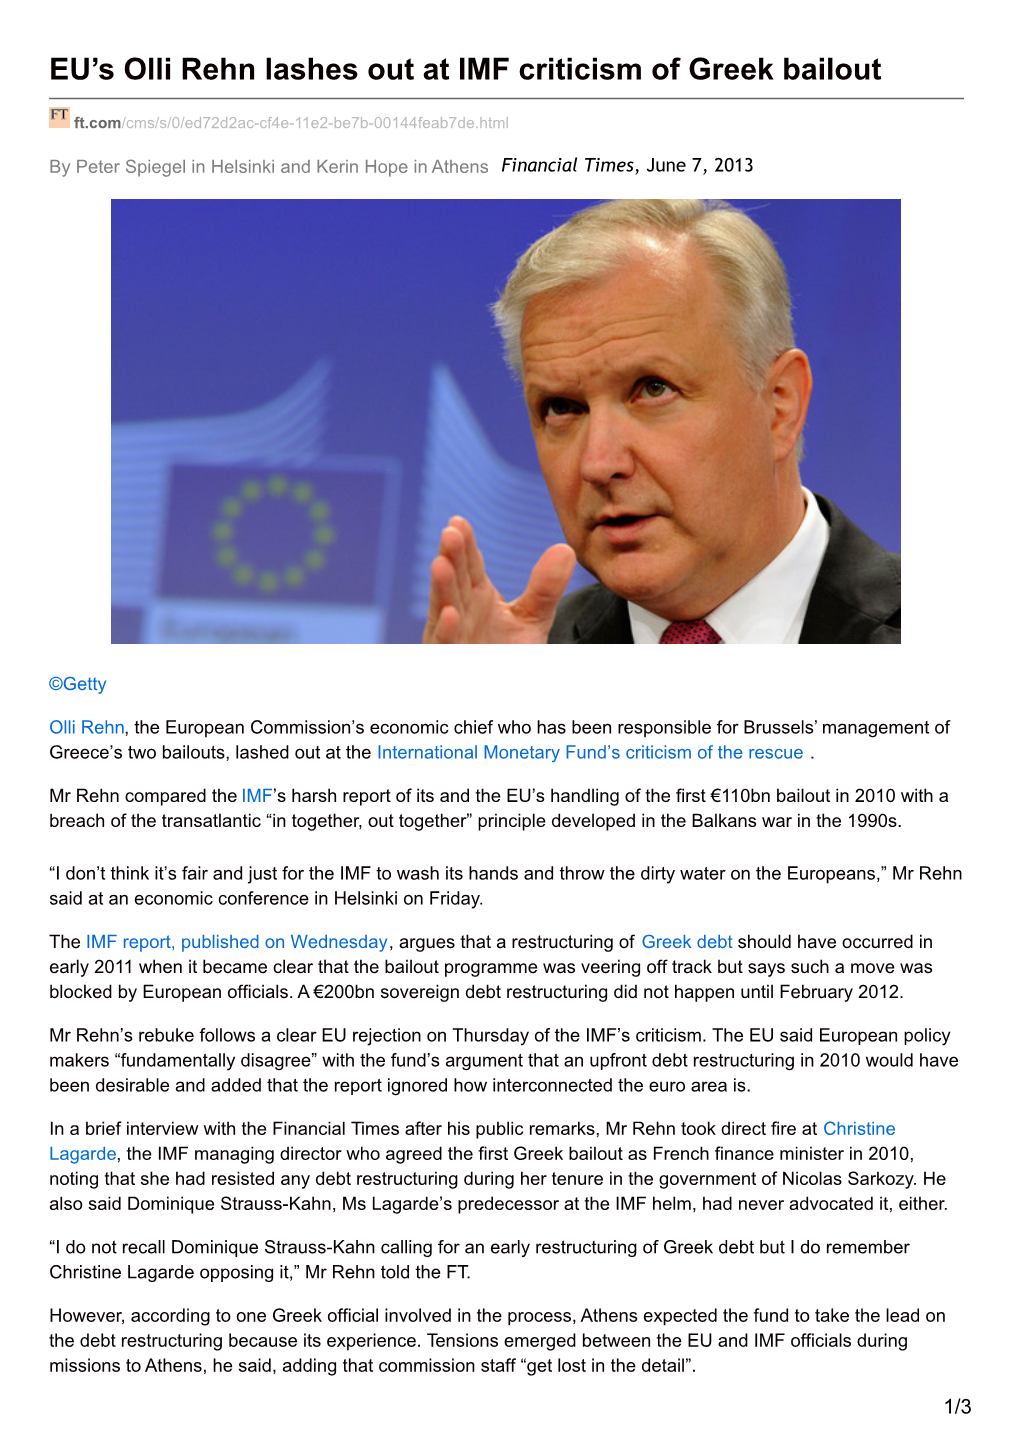 EU's Olli Rehn Lashes out at IMF Criticism of Greek Bailout